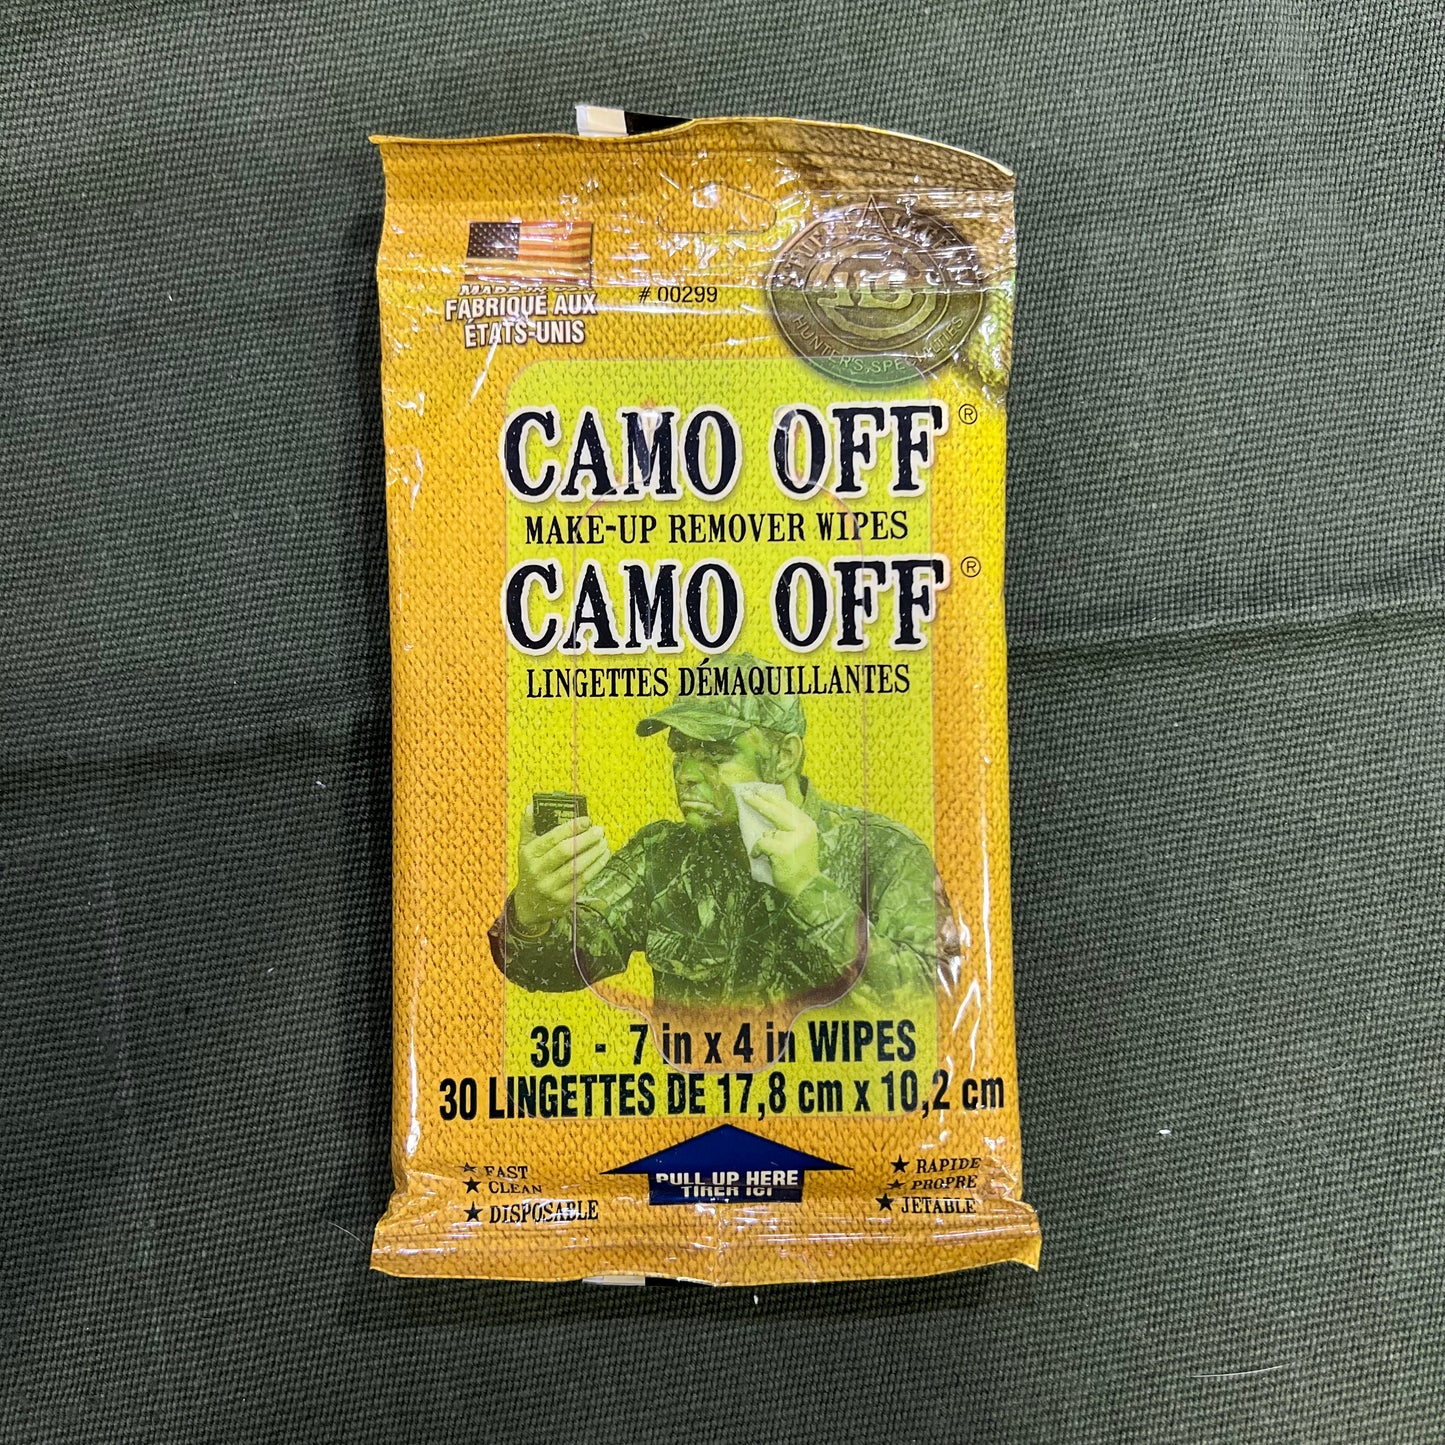 Camo off make up remover wipes